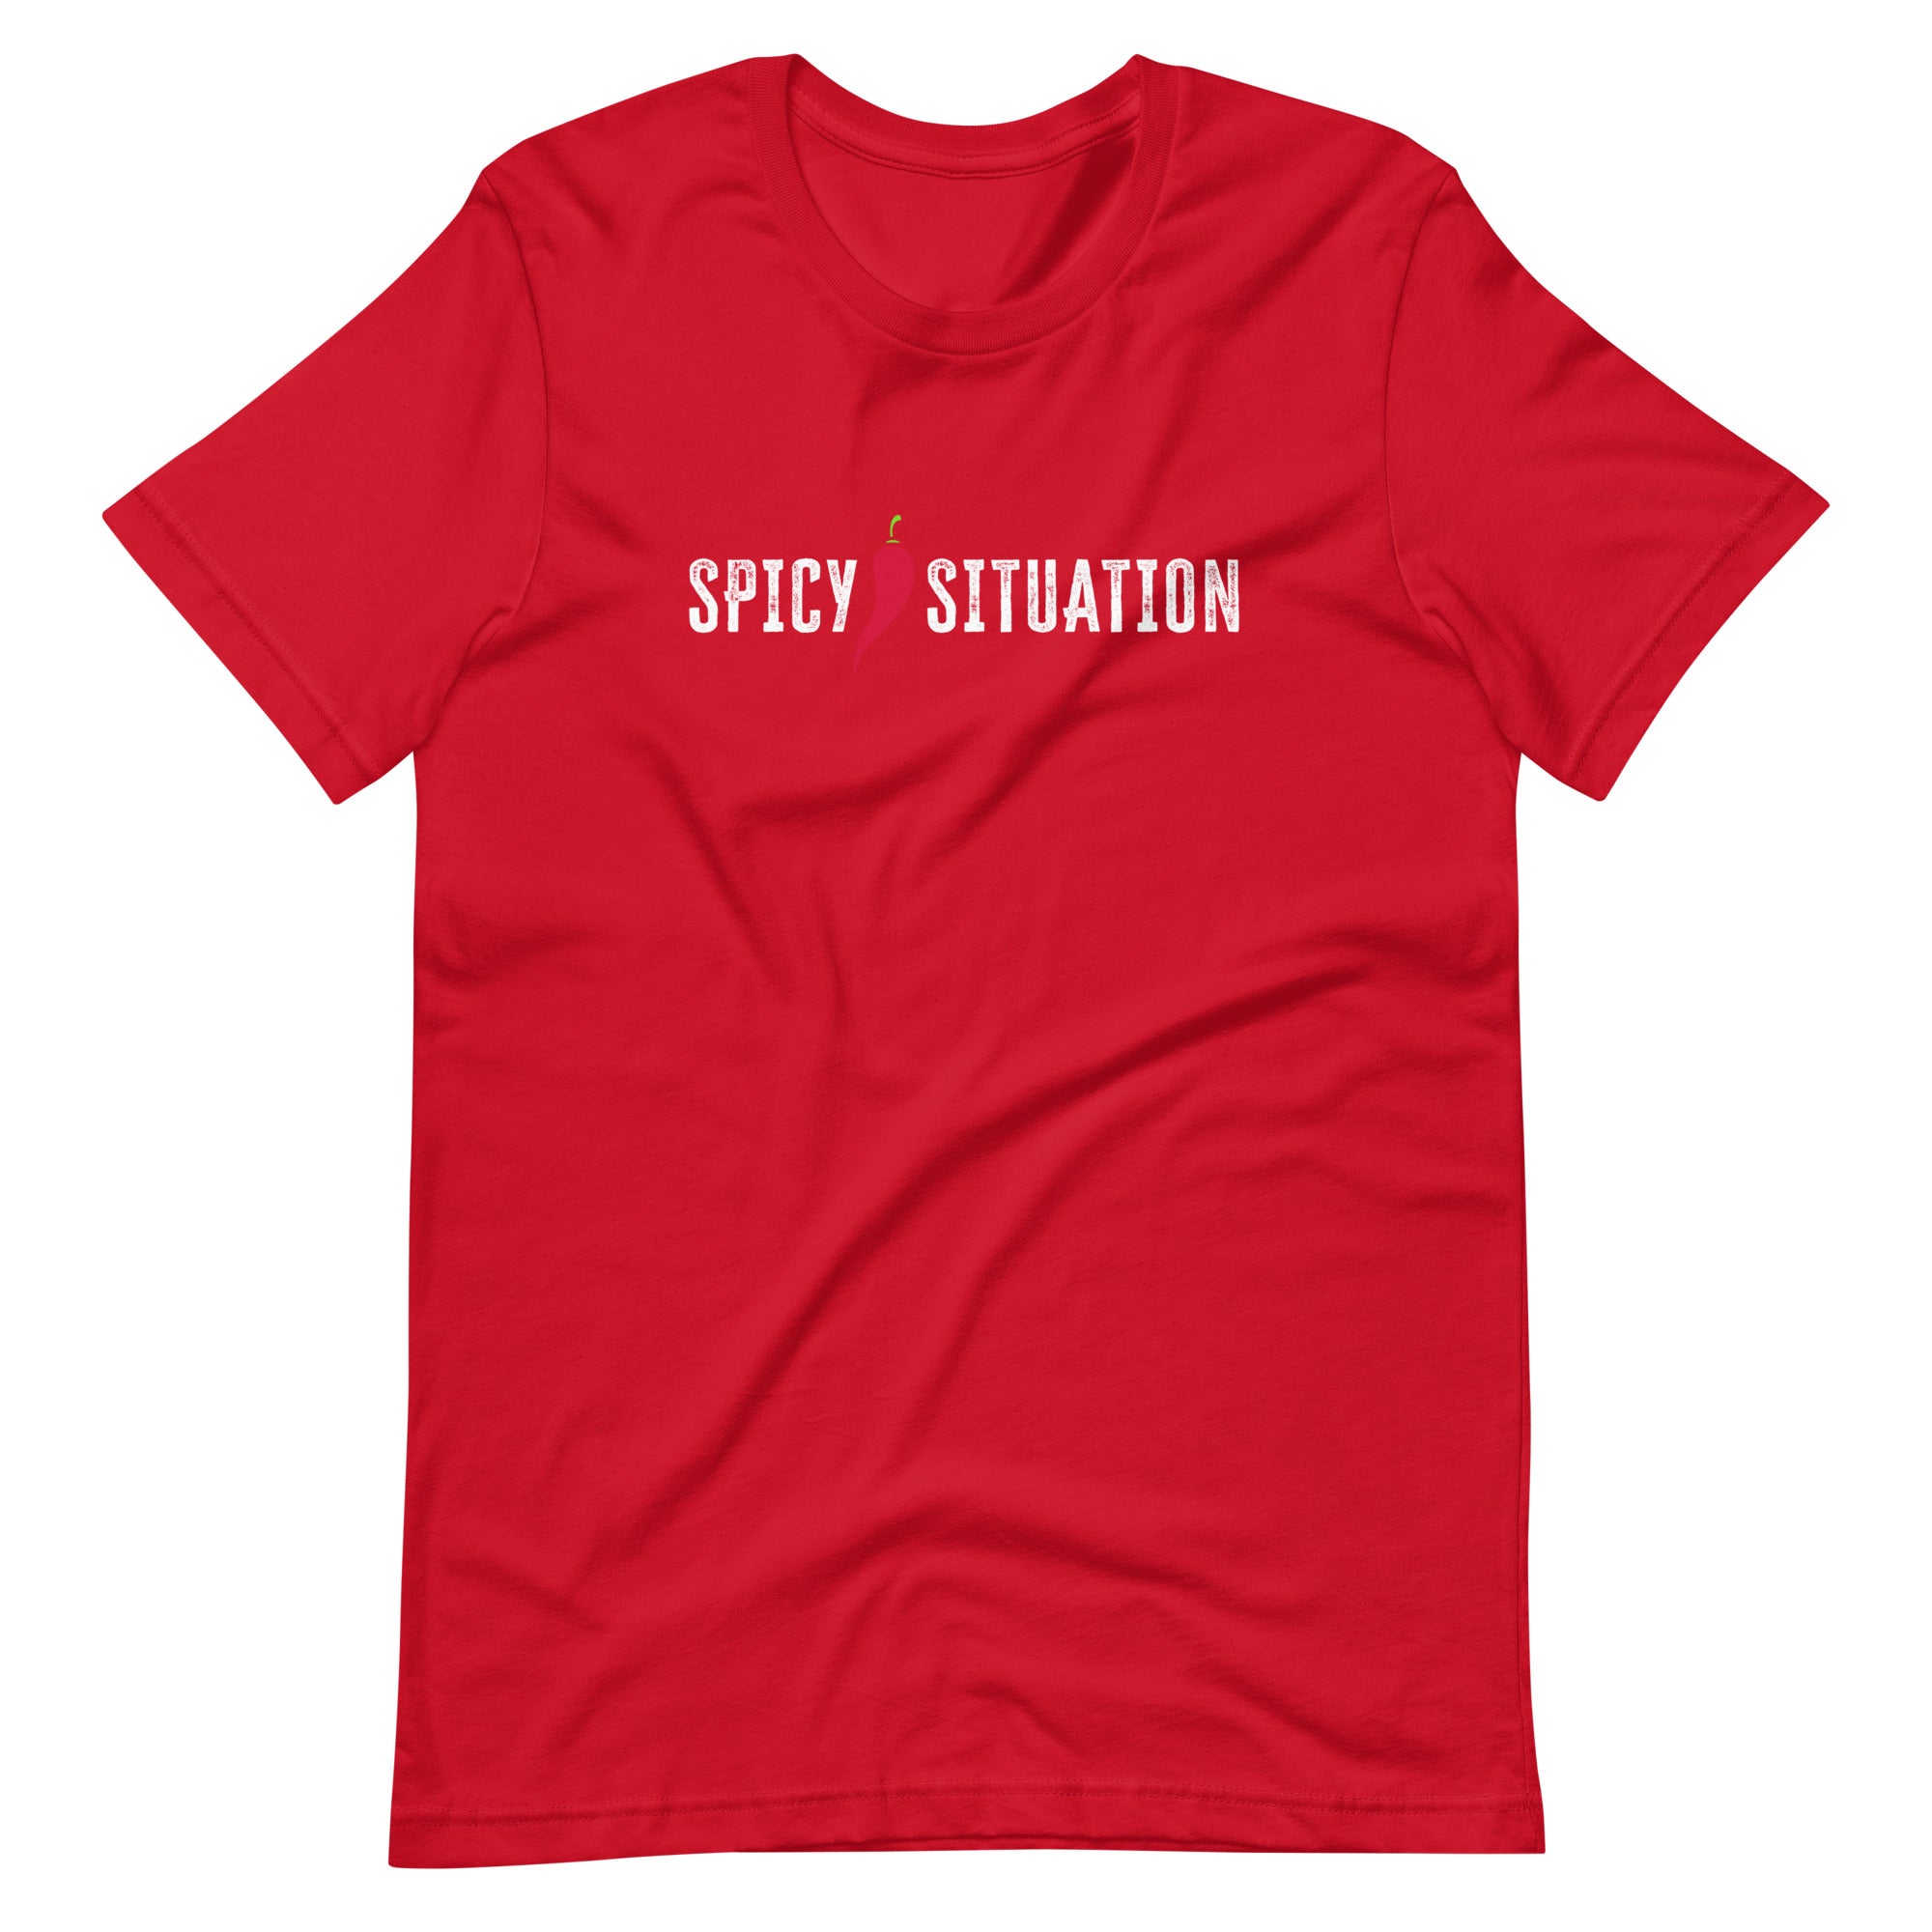 Mike Sorrentino Spicy Situation Shirt